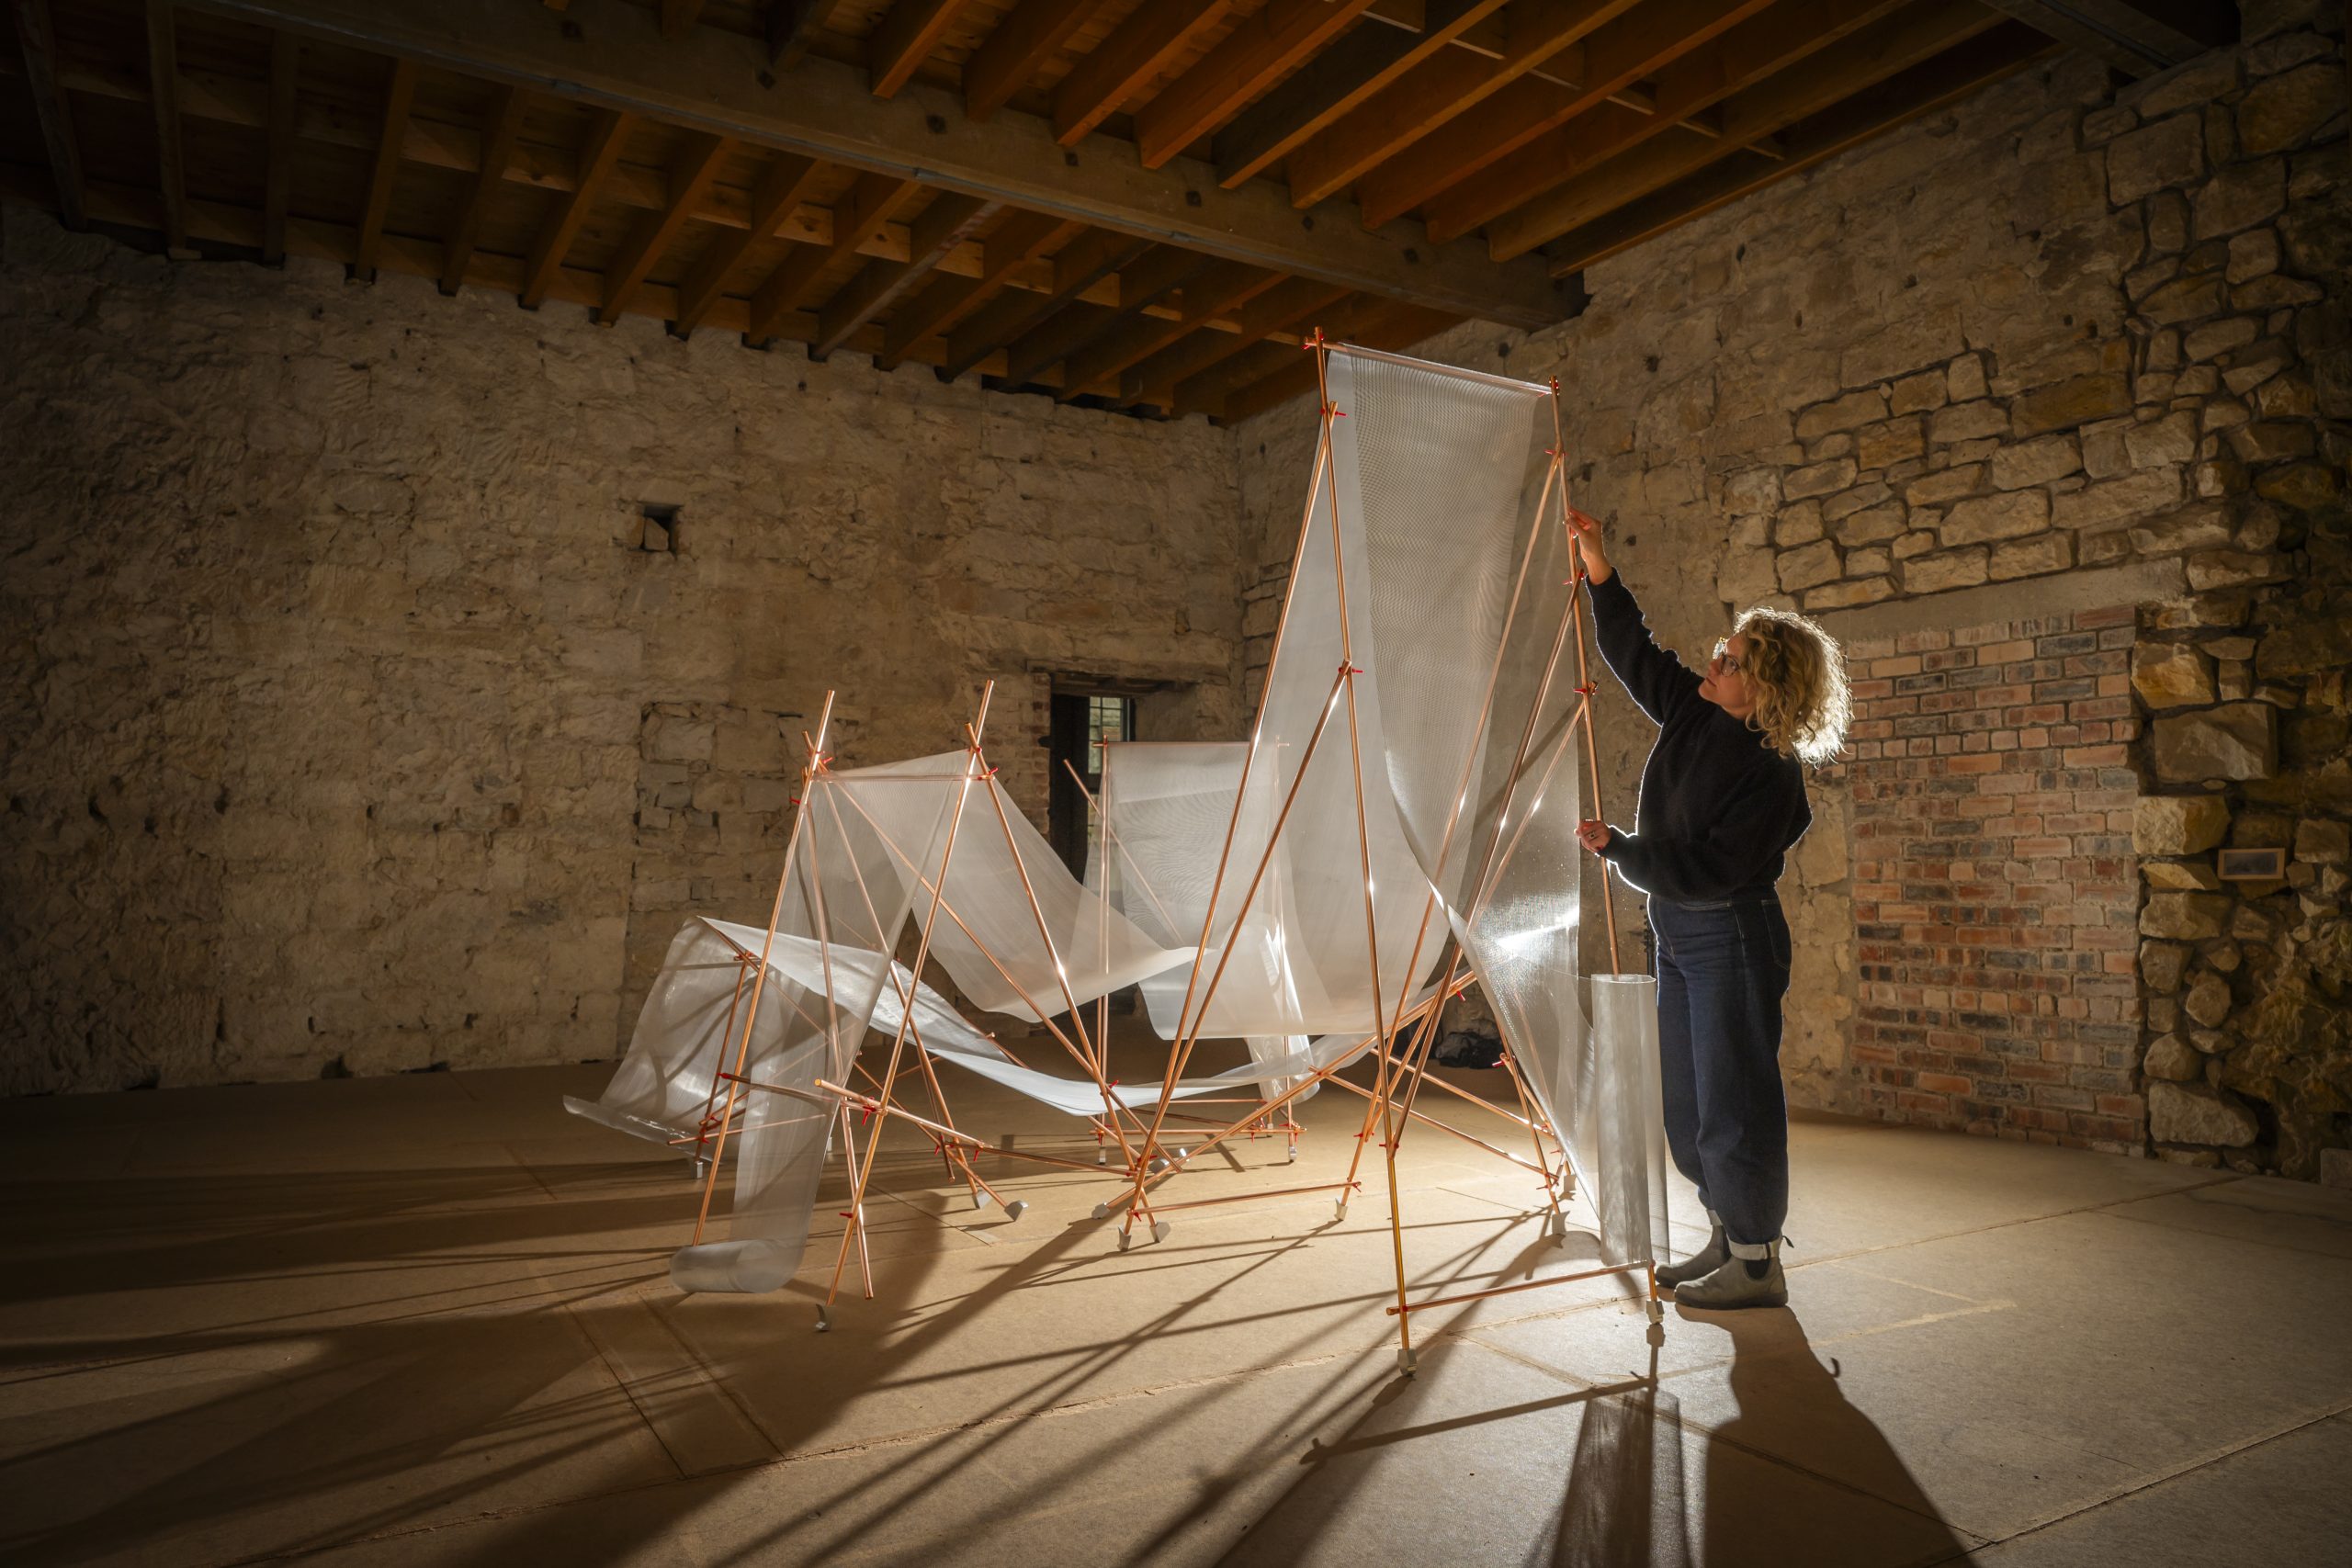 Art installation in the middle of a bare room with a person adjusting it.